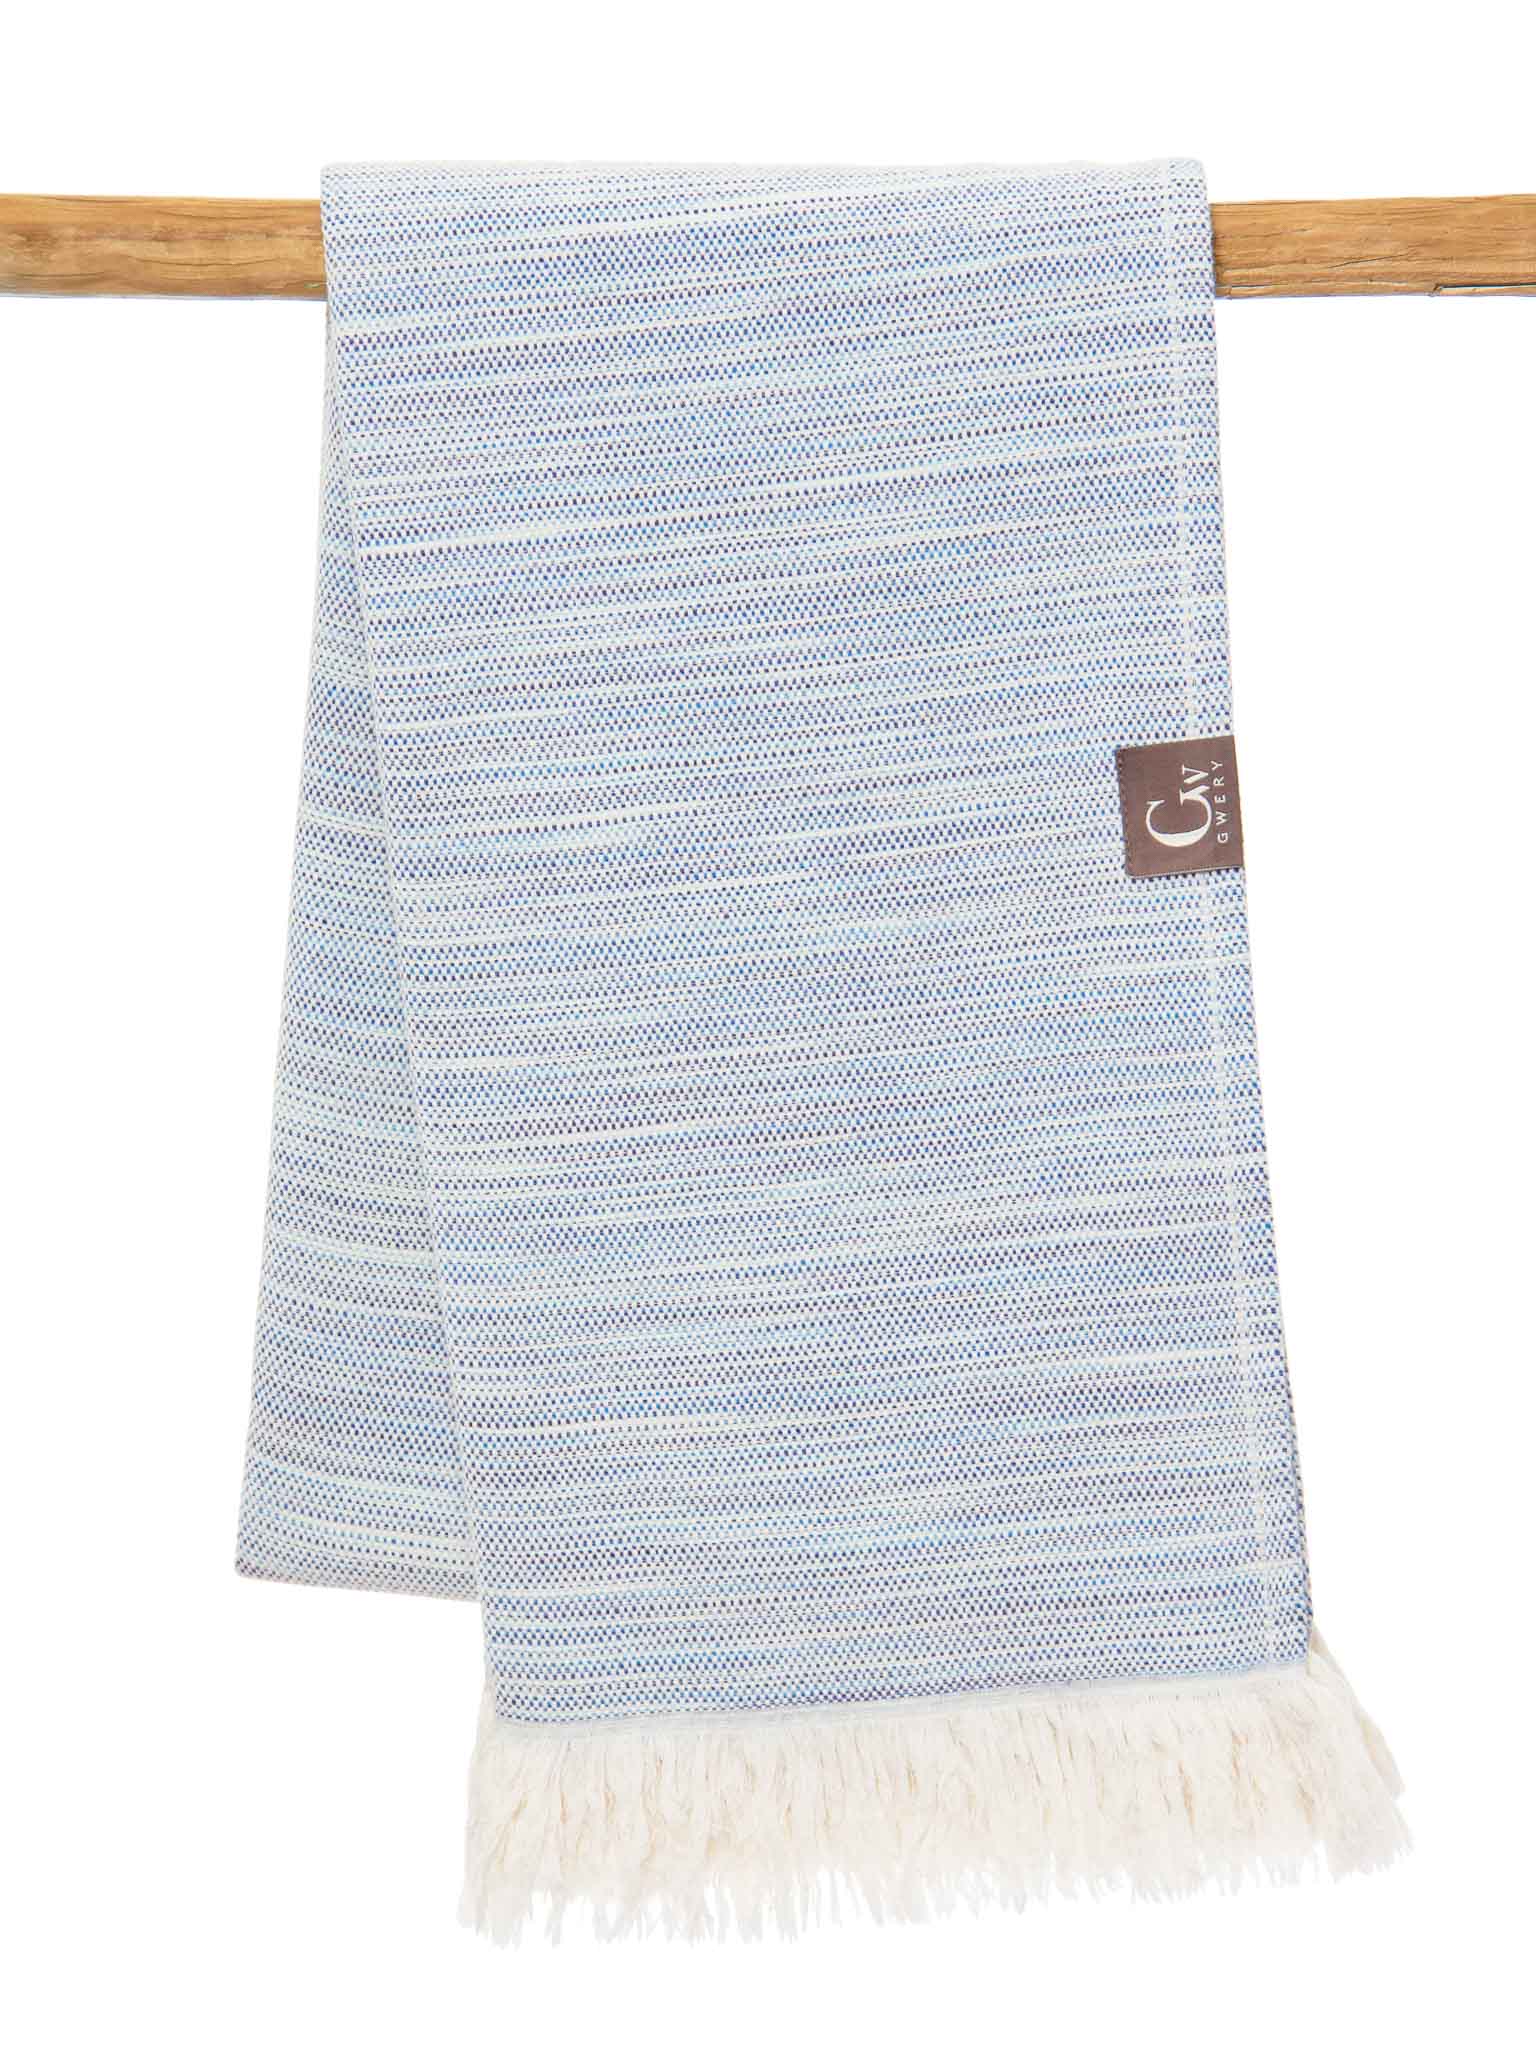 BLUE PATTERNED FEATHER XL BEACH TOWEL